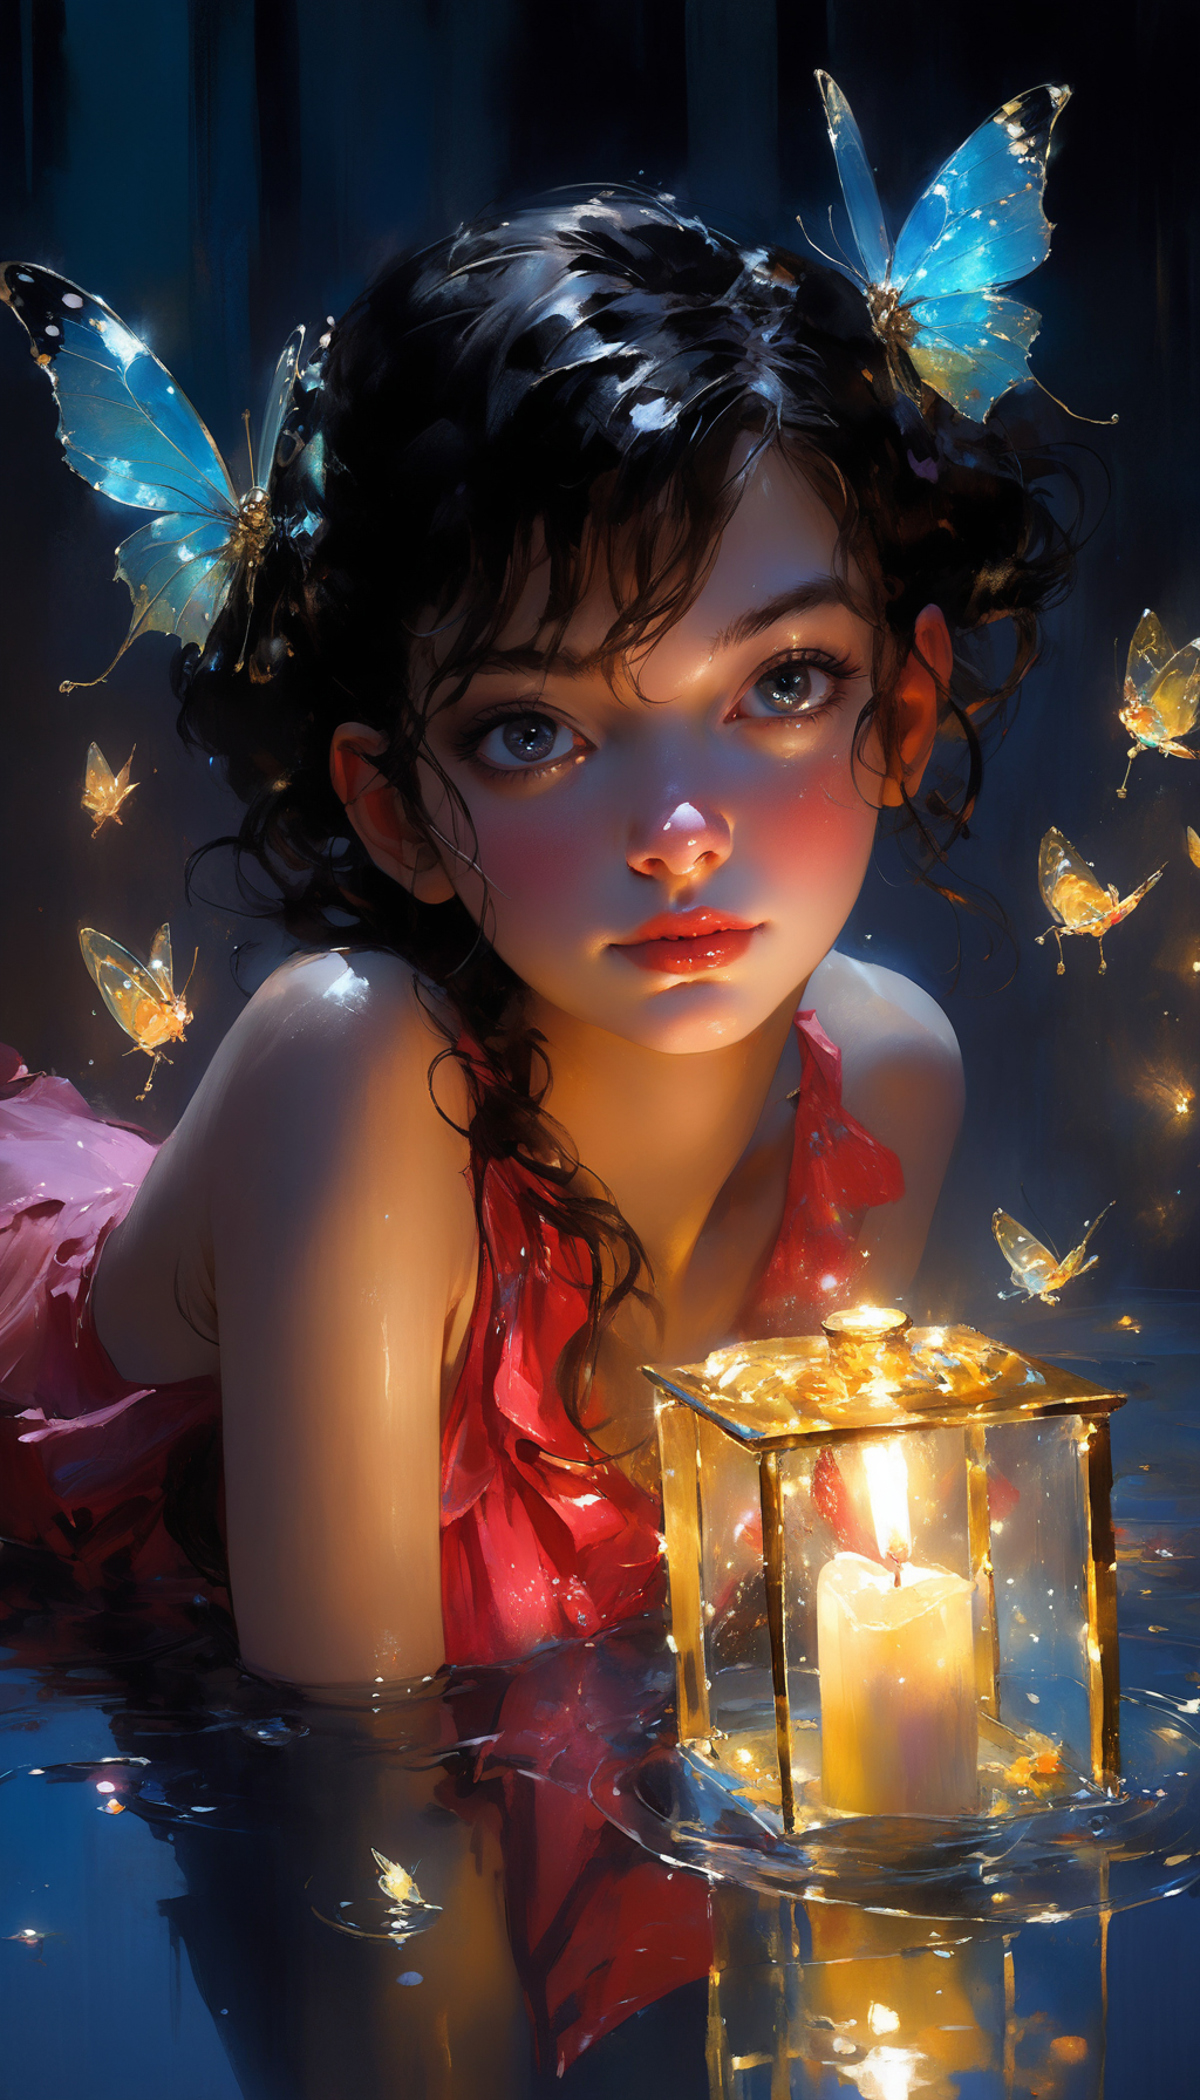 A painting of a young girl with blue eyes and pink lips, dressed in a pink dress, holding a candle and surrounded by butterflies.